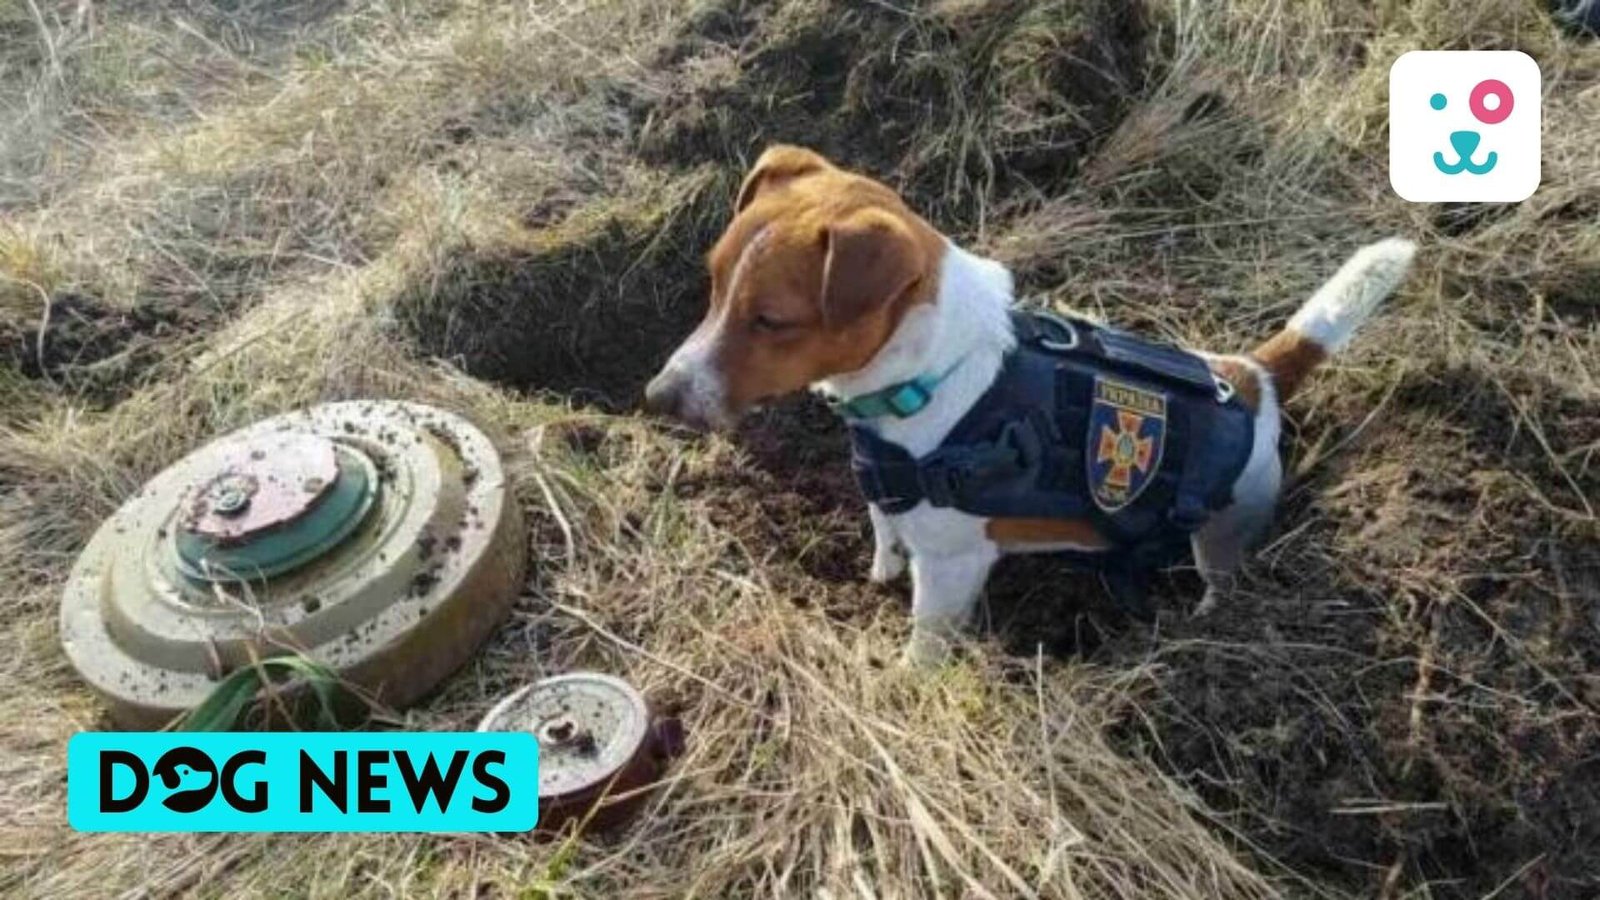 A 2-year-old Ukrainian dog named Patron helps in detecting explosives.